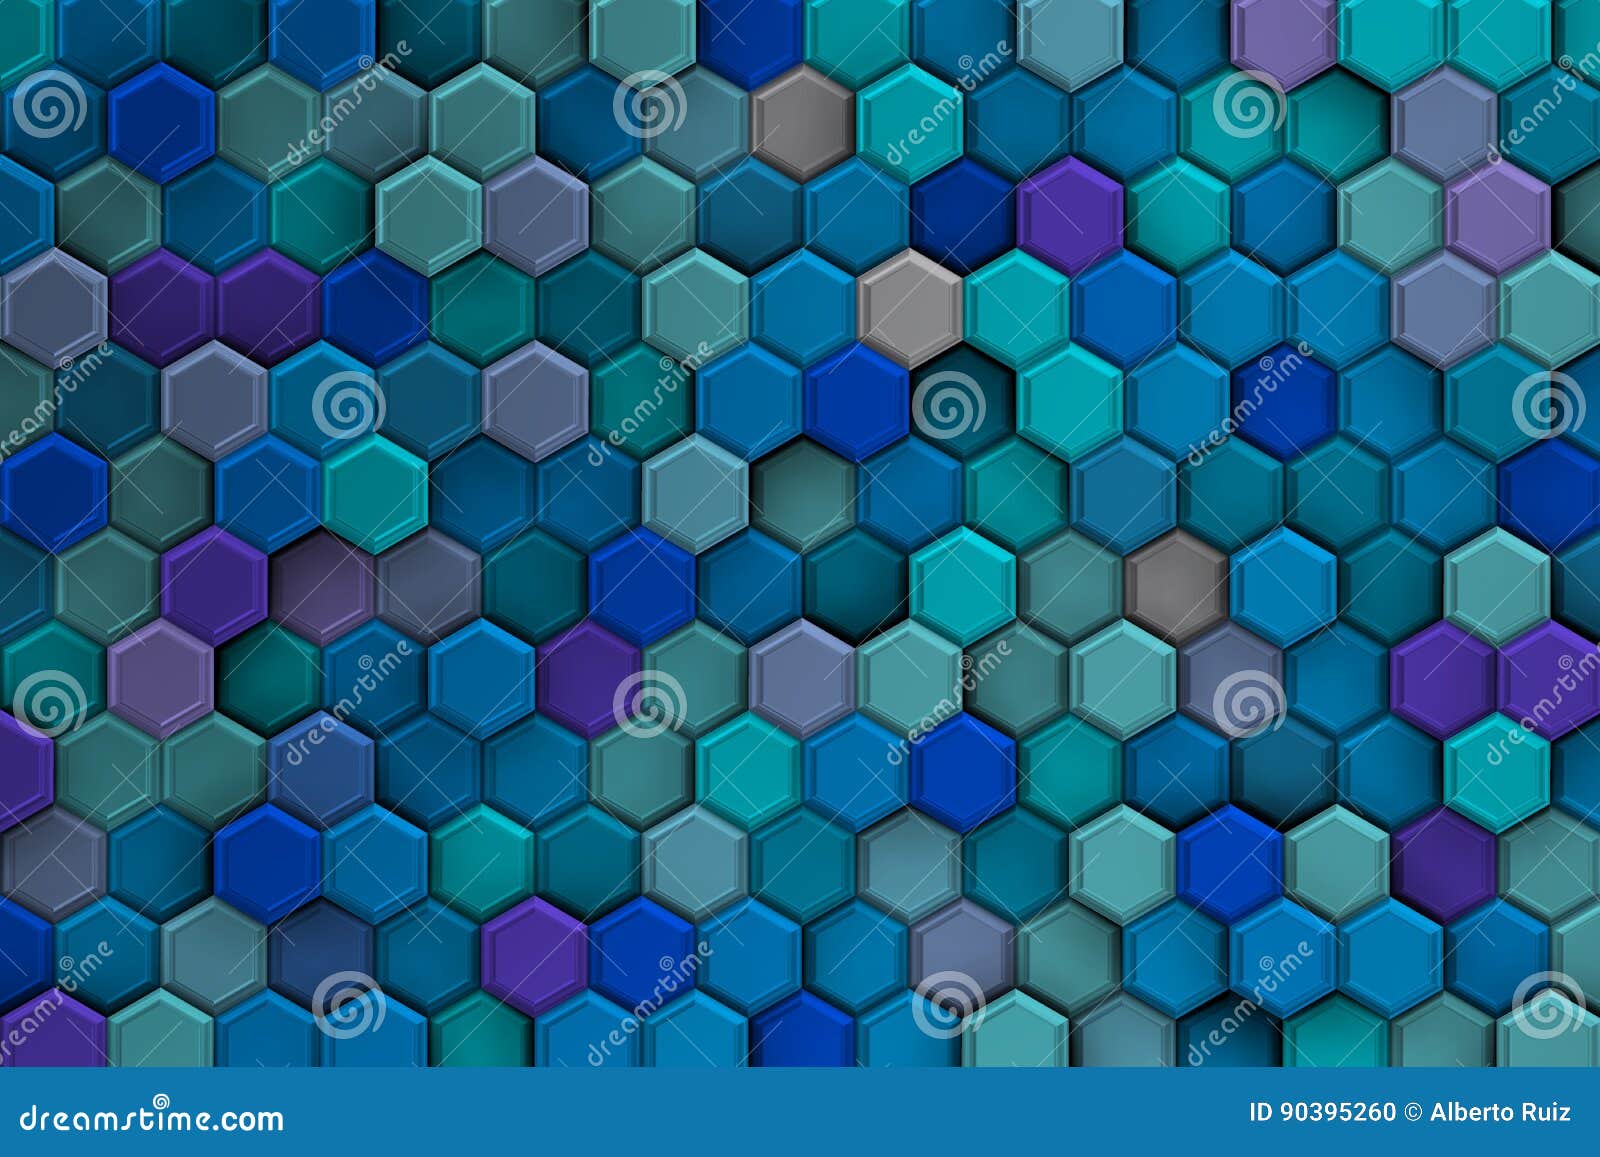 background of bluish 3d hexagons with relief and brights.